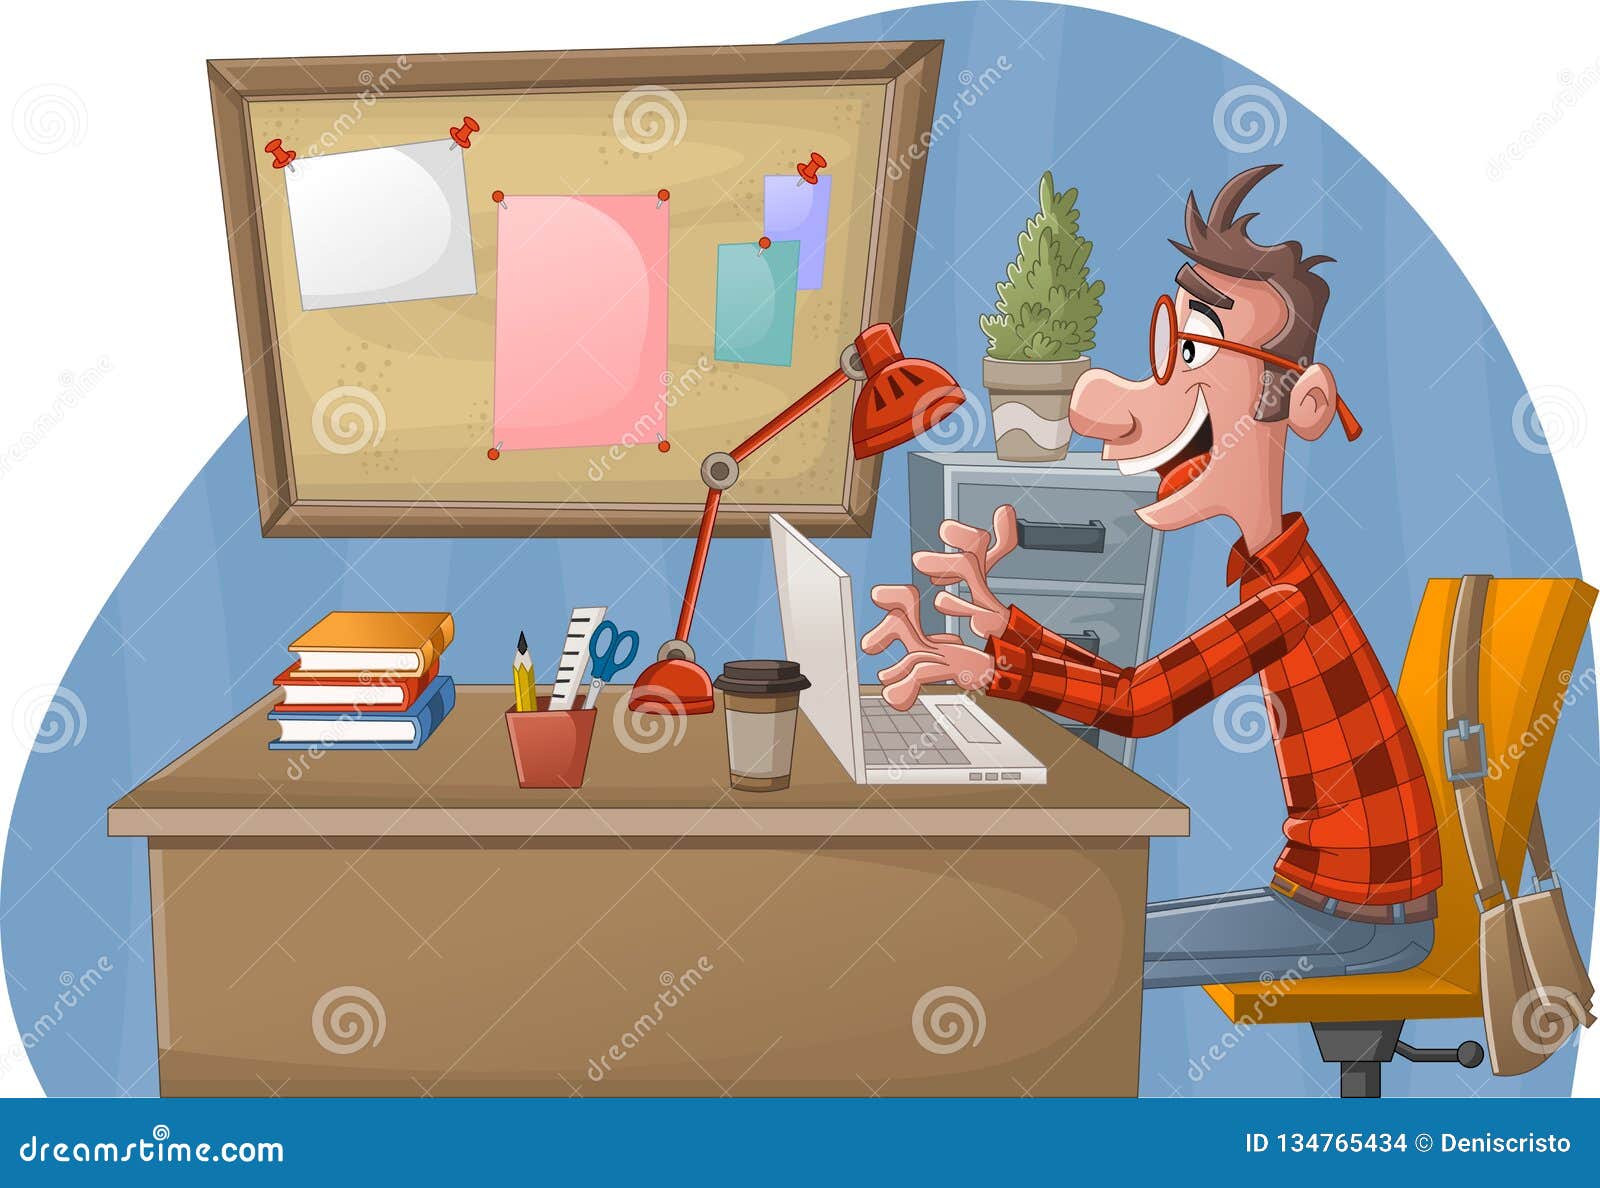 Cartoon Man Working with Computer. Office Workspace with Desks Stock Vector  - Illustration of education, profession: 134765434